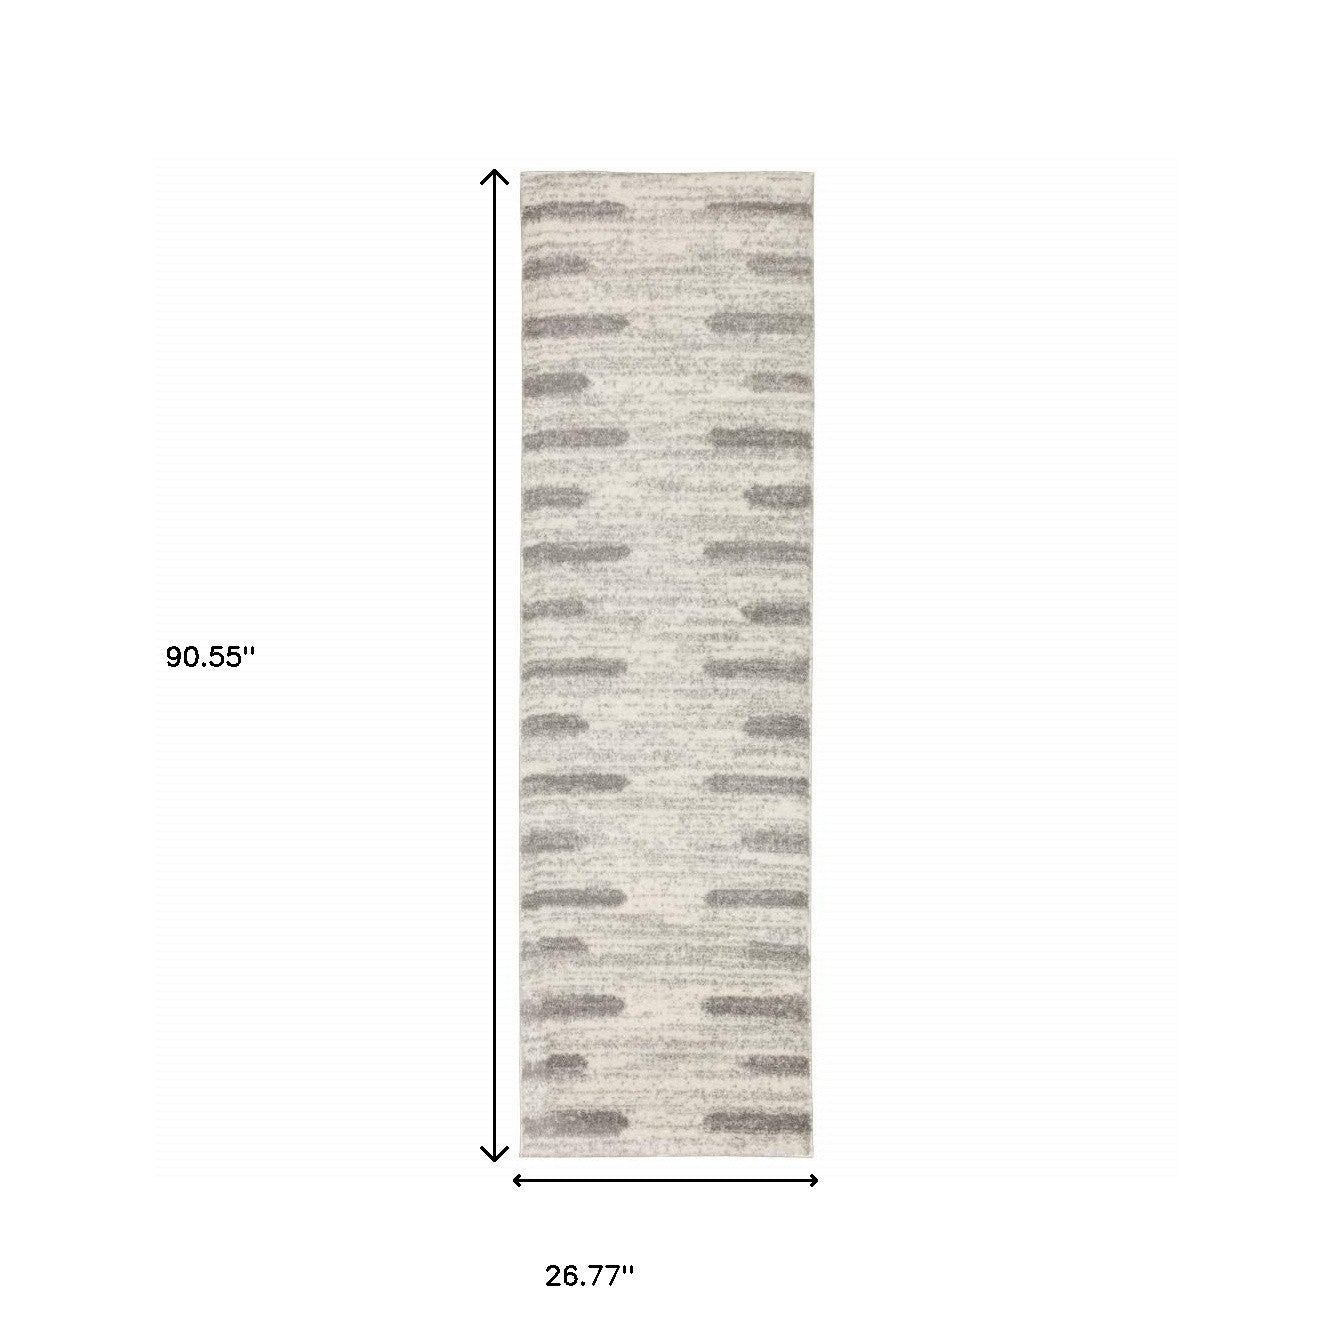 2' X 8' Ivory And Grey Geometric Shag Power Loom Stain Resistant Runner Rug